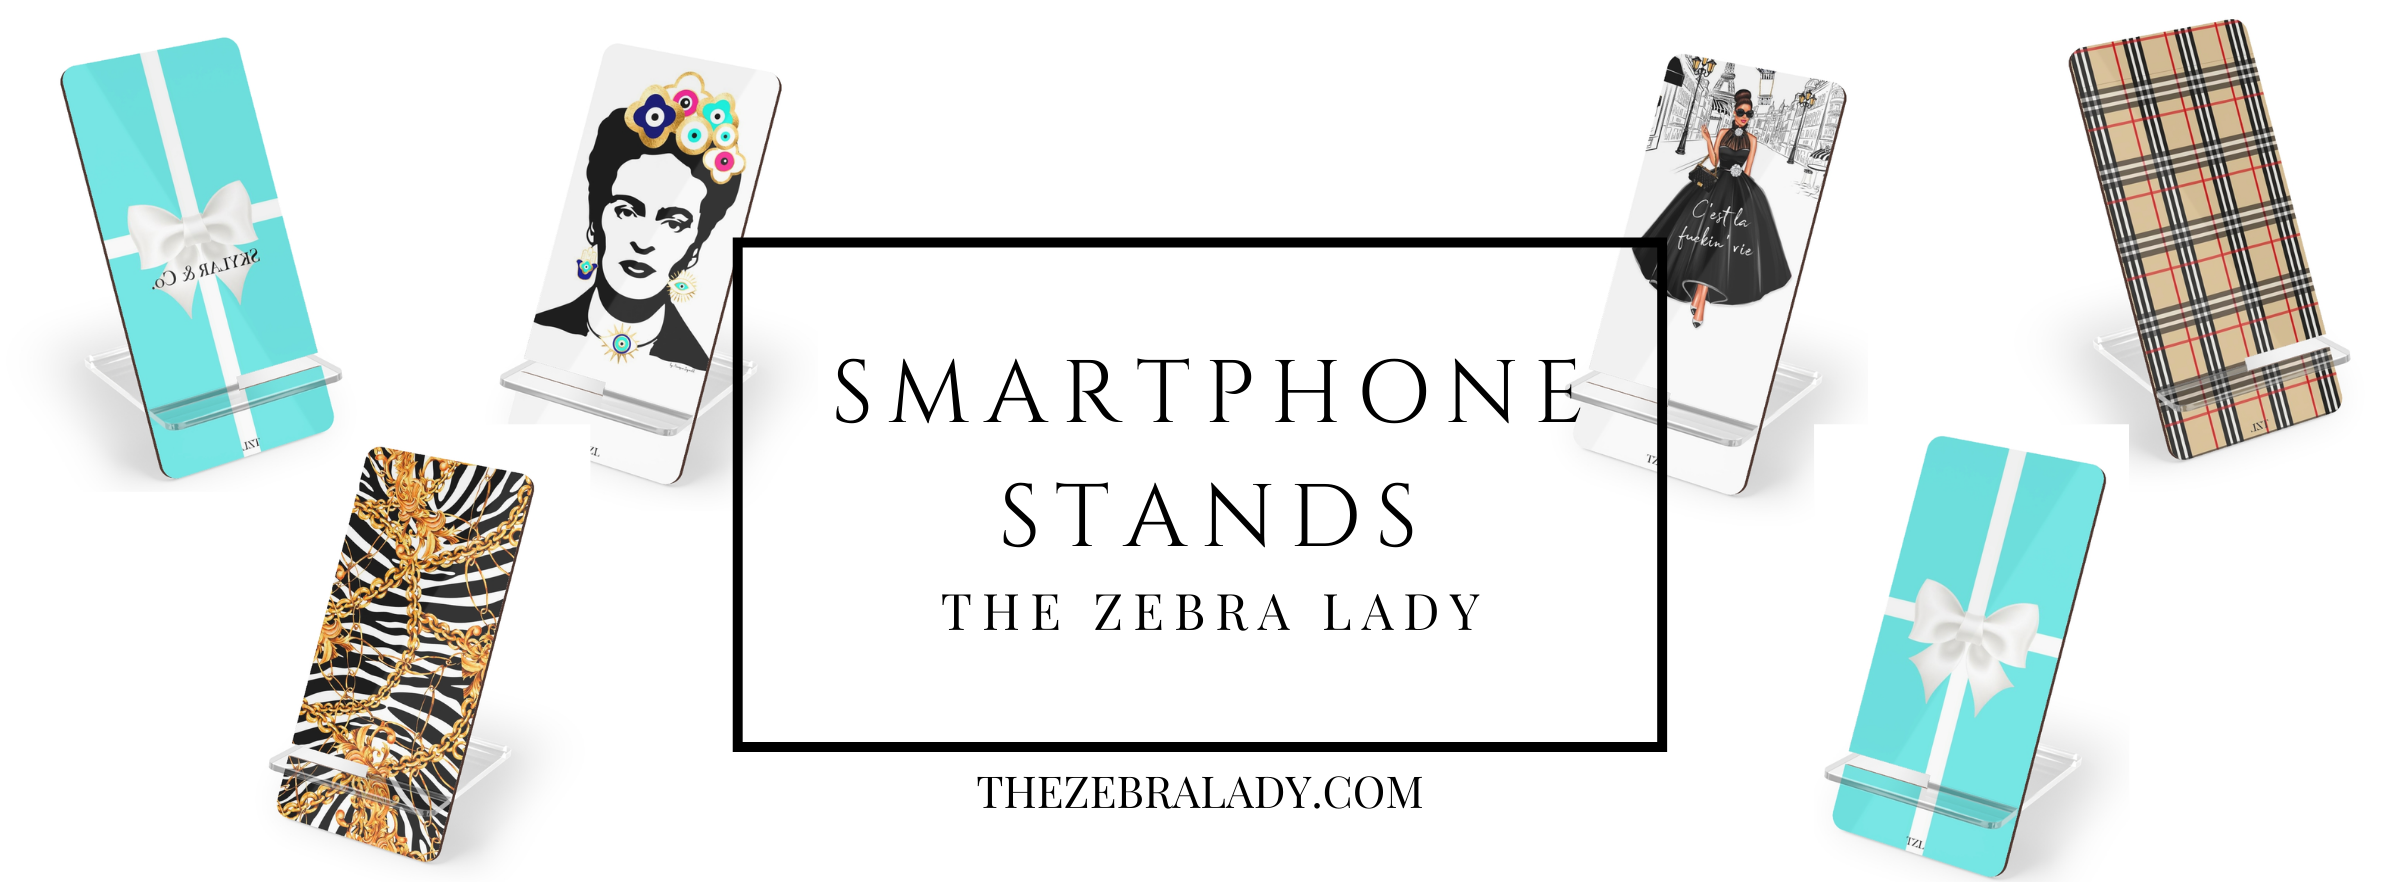 Smartphone Cellphone stands  banner  THEZEBRALADY.COM.png